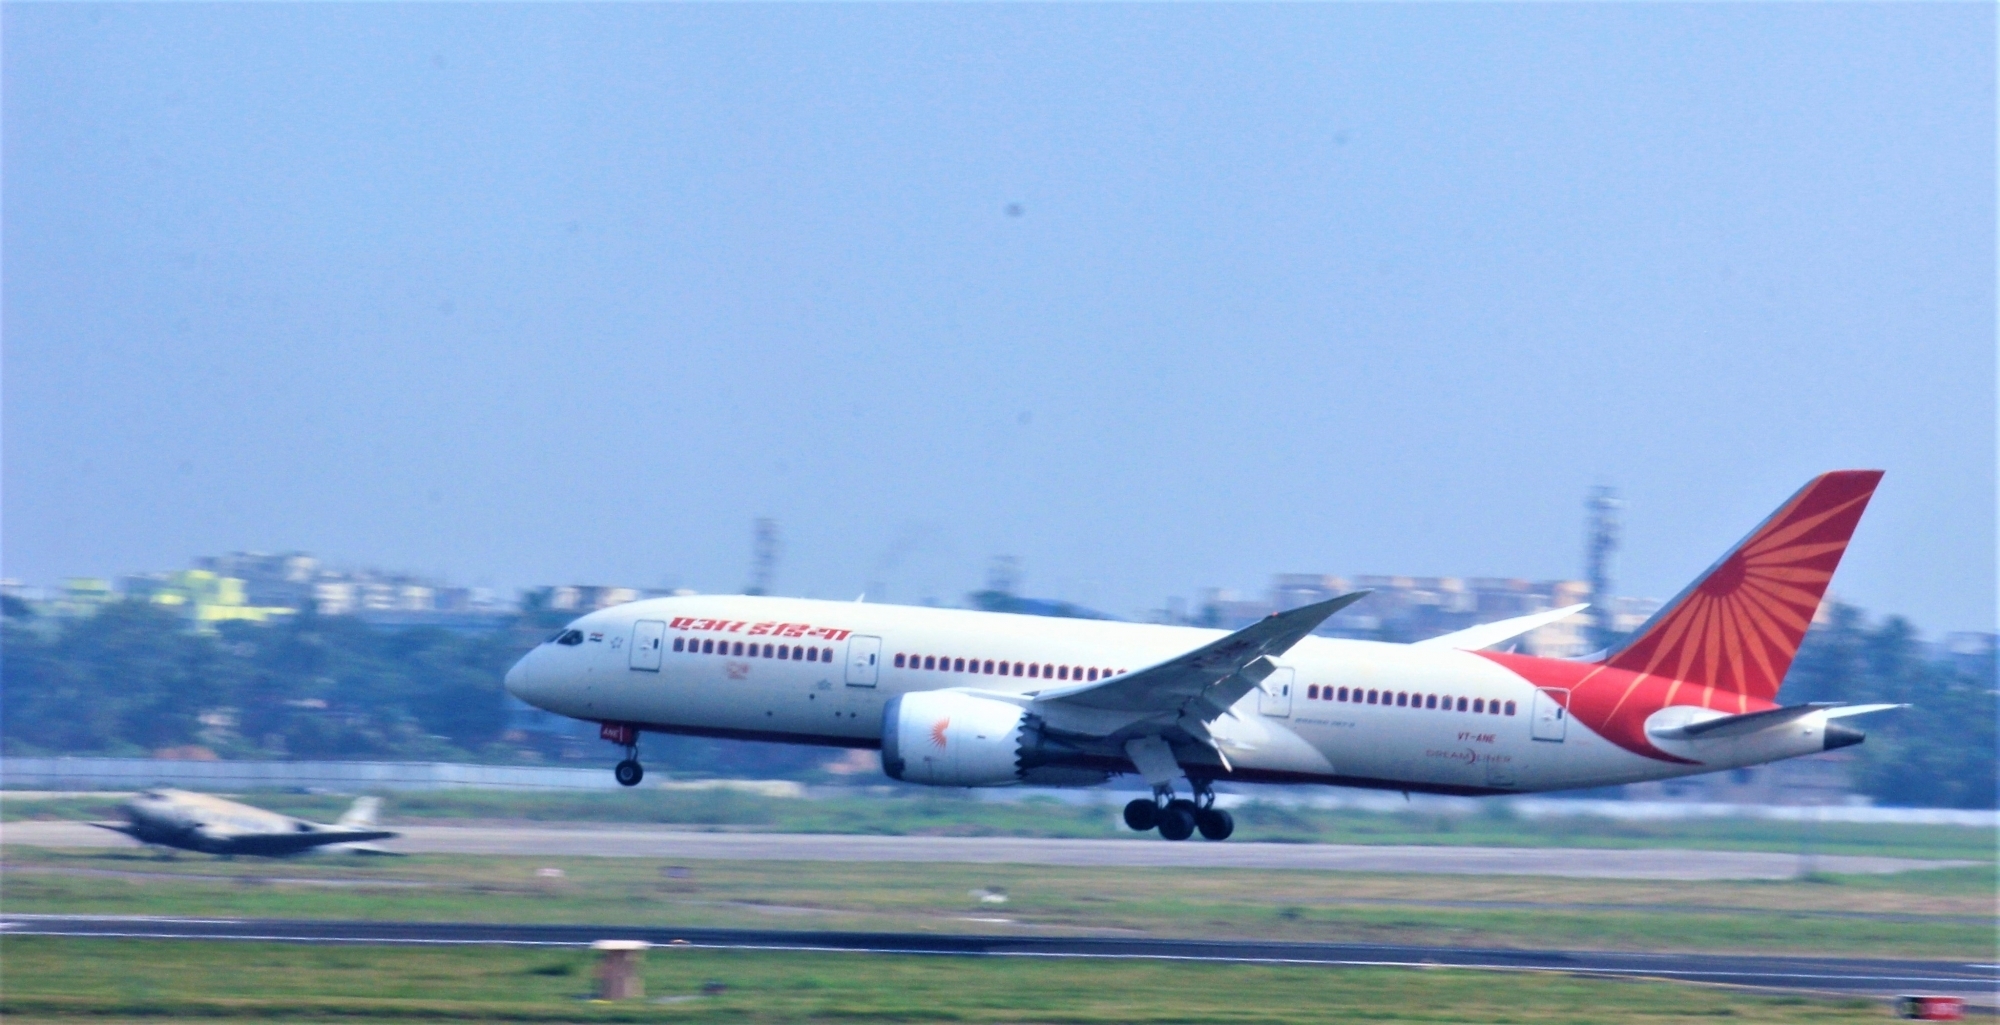 Air India pilots now use nursery rhyme to attack management